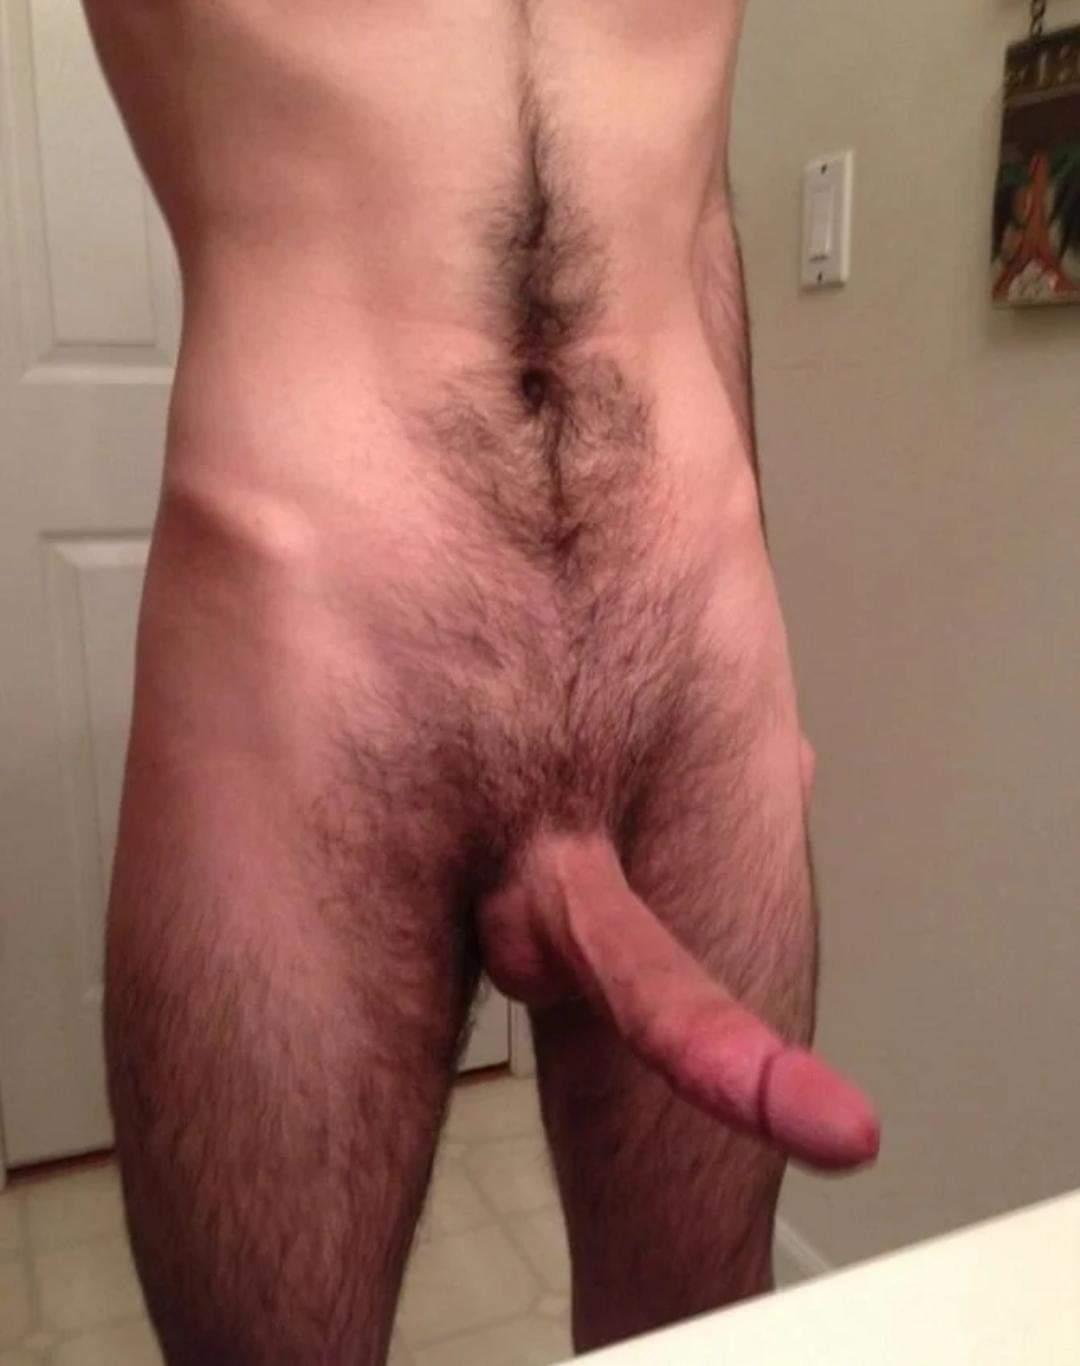 Teen boy with thin dick